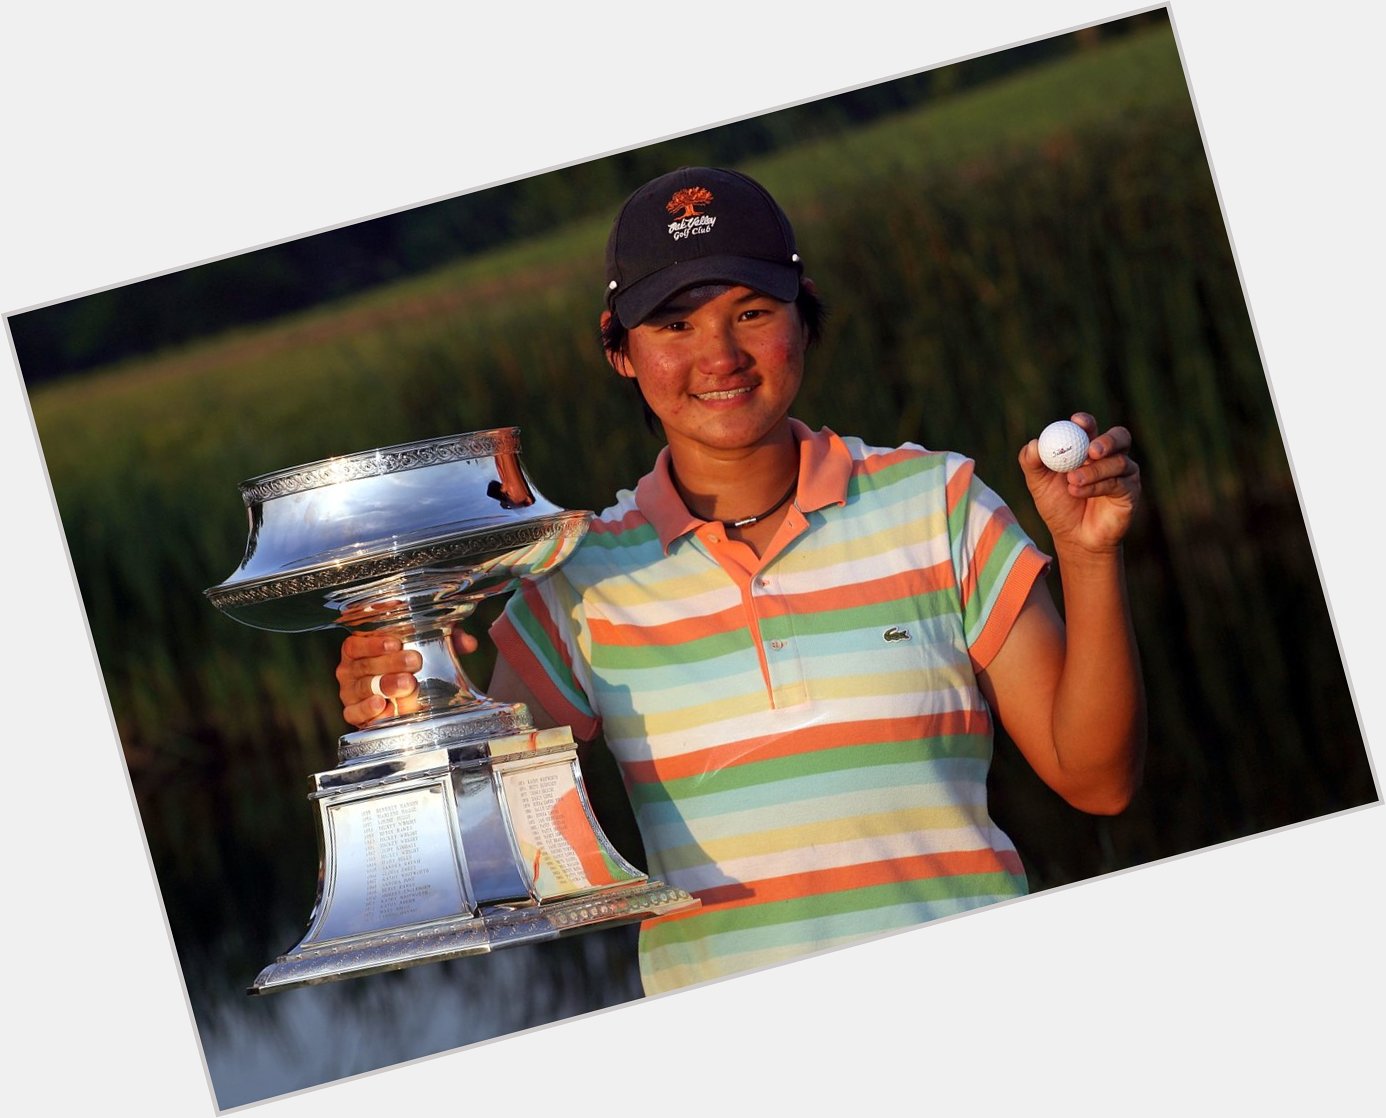 Happy birthday to our 2008 and 2011 Champion, Yani Tseng.

We hope it\s a great day! 